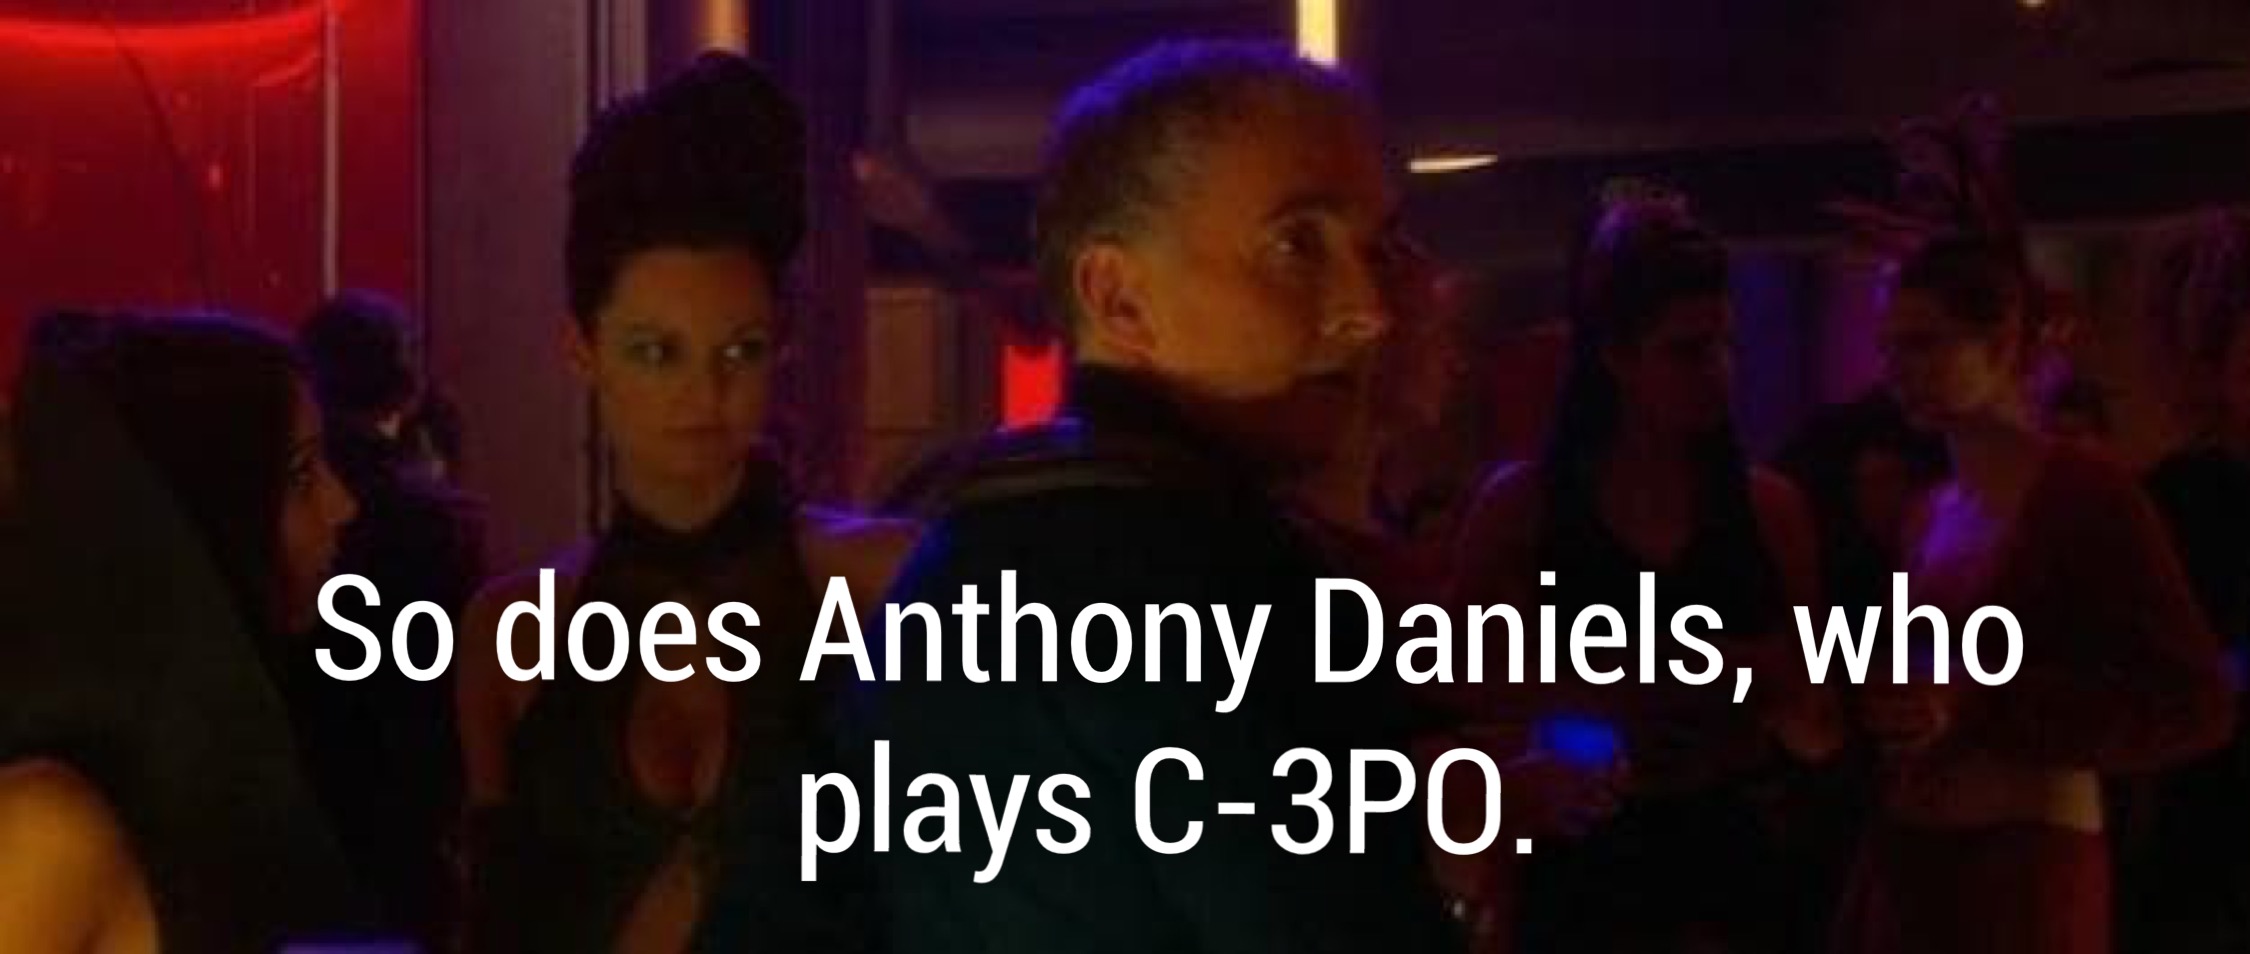 audience - So does Anthony Daniels, who plays C3PO.